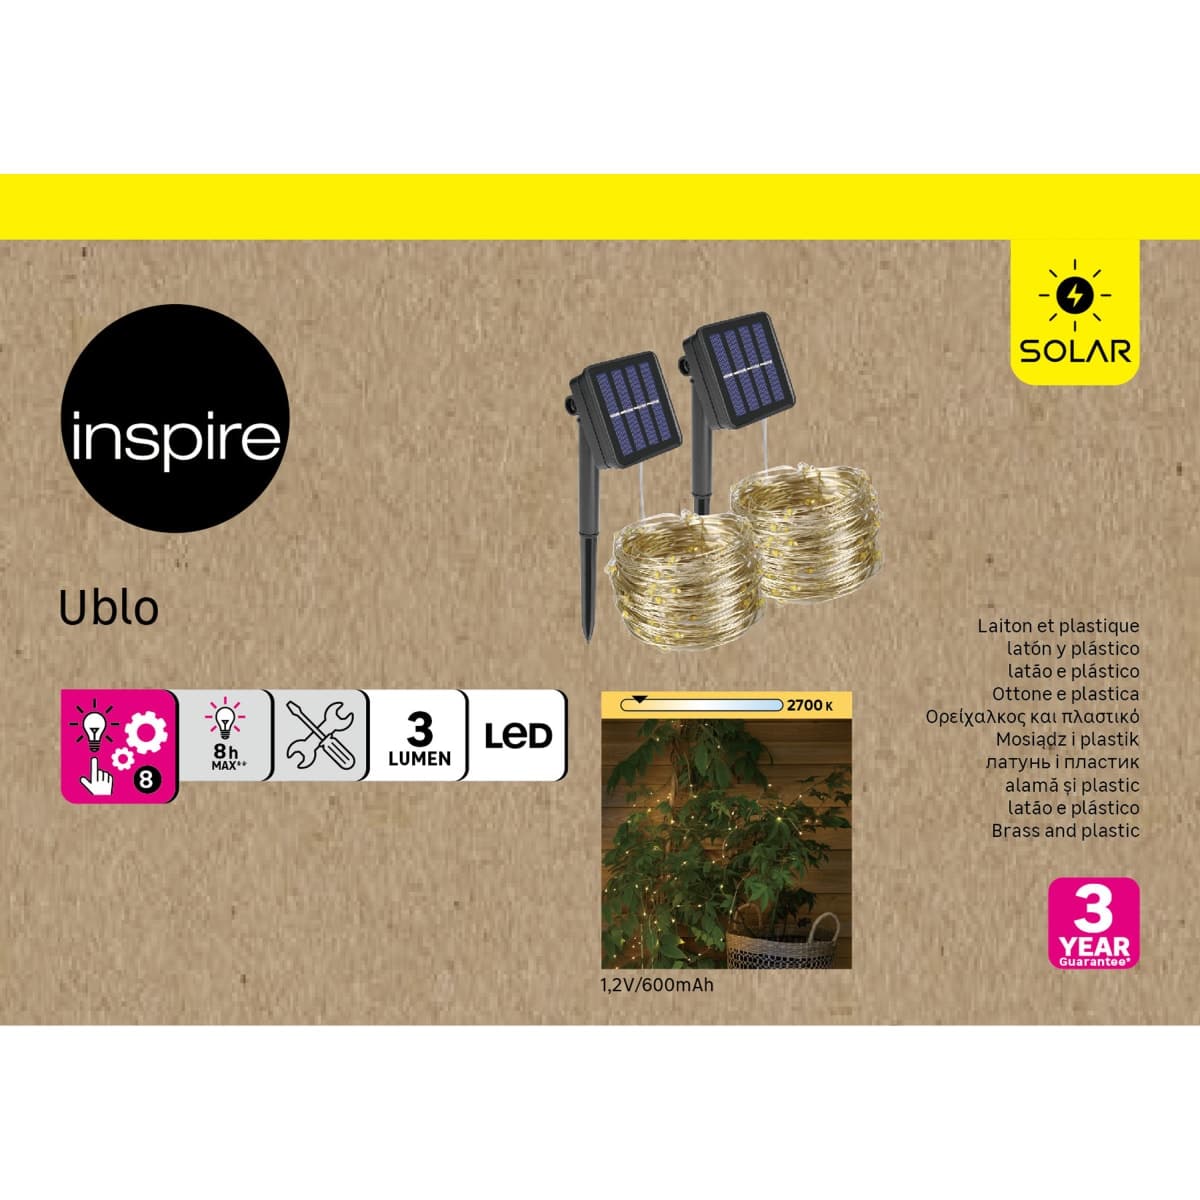 UBLO SOLAR GARLAND 12M LED WARM LIGHT IP44 - Premium Garlands and other solutions from Bricocenter - Just €15.99! Shop now at Maltashopper.com